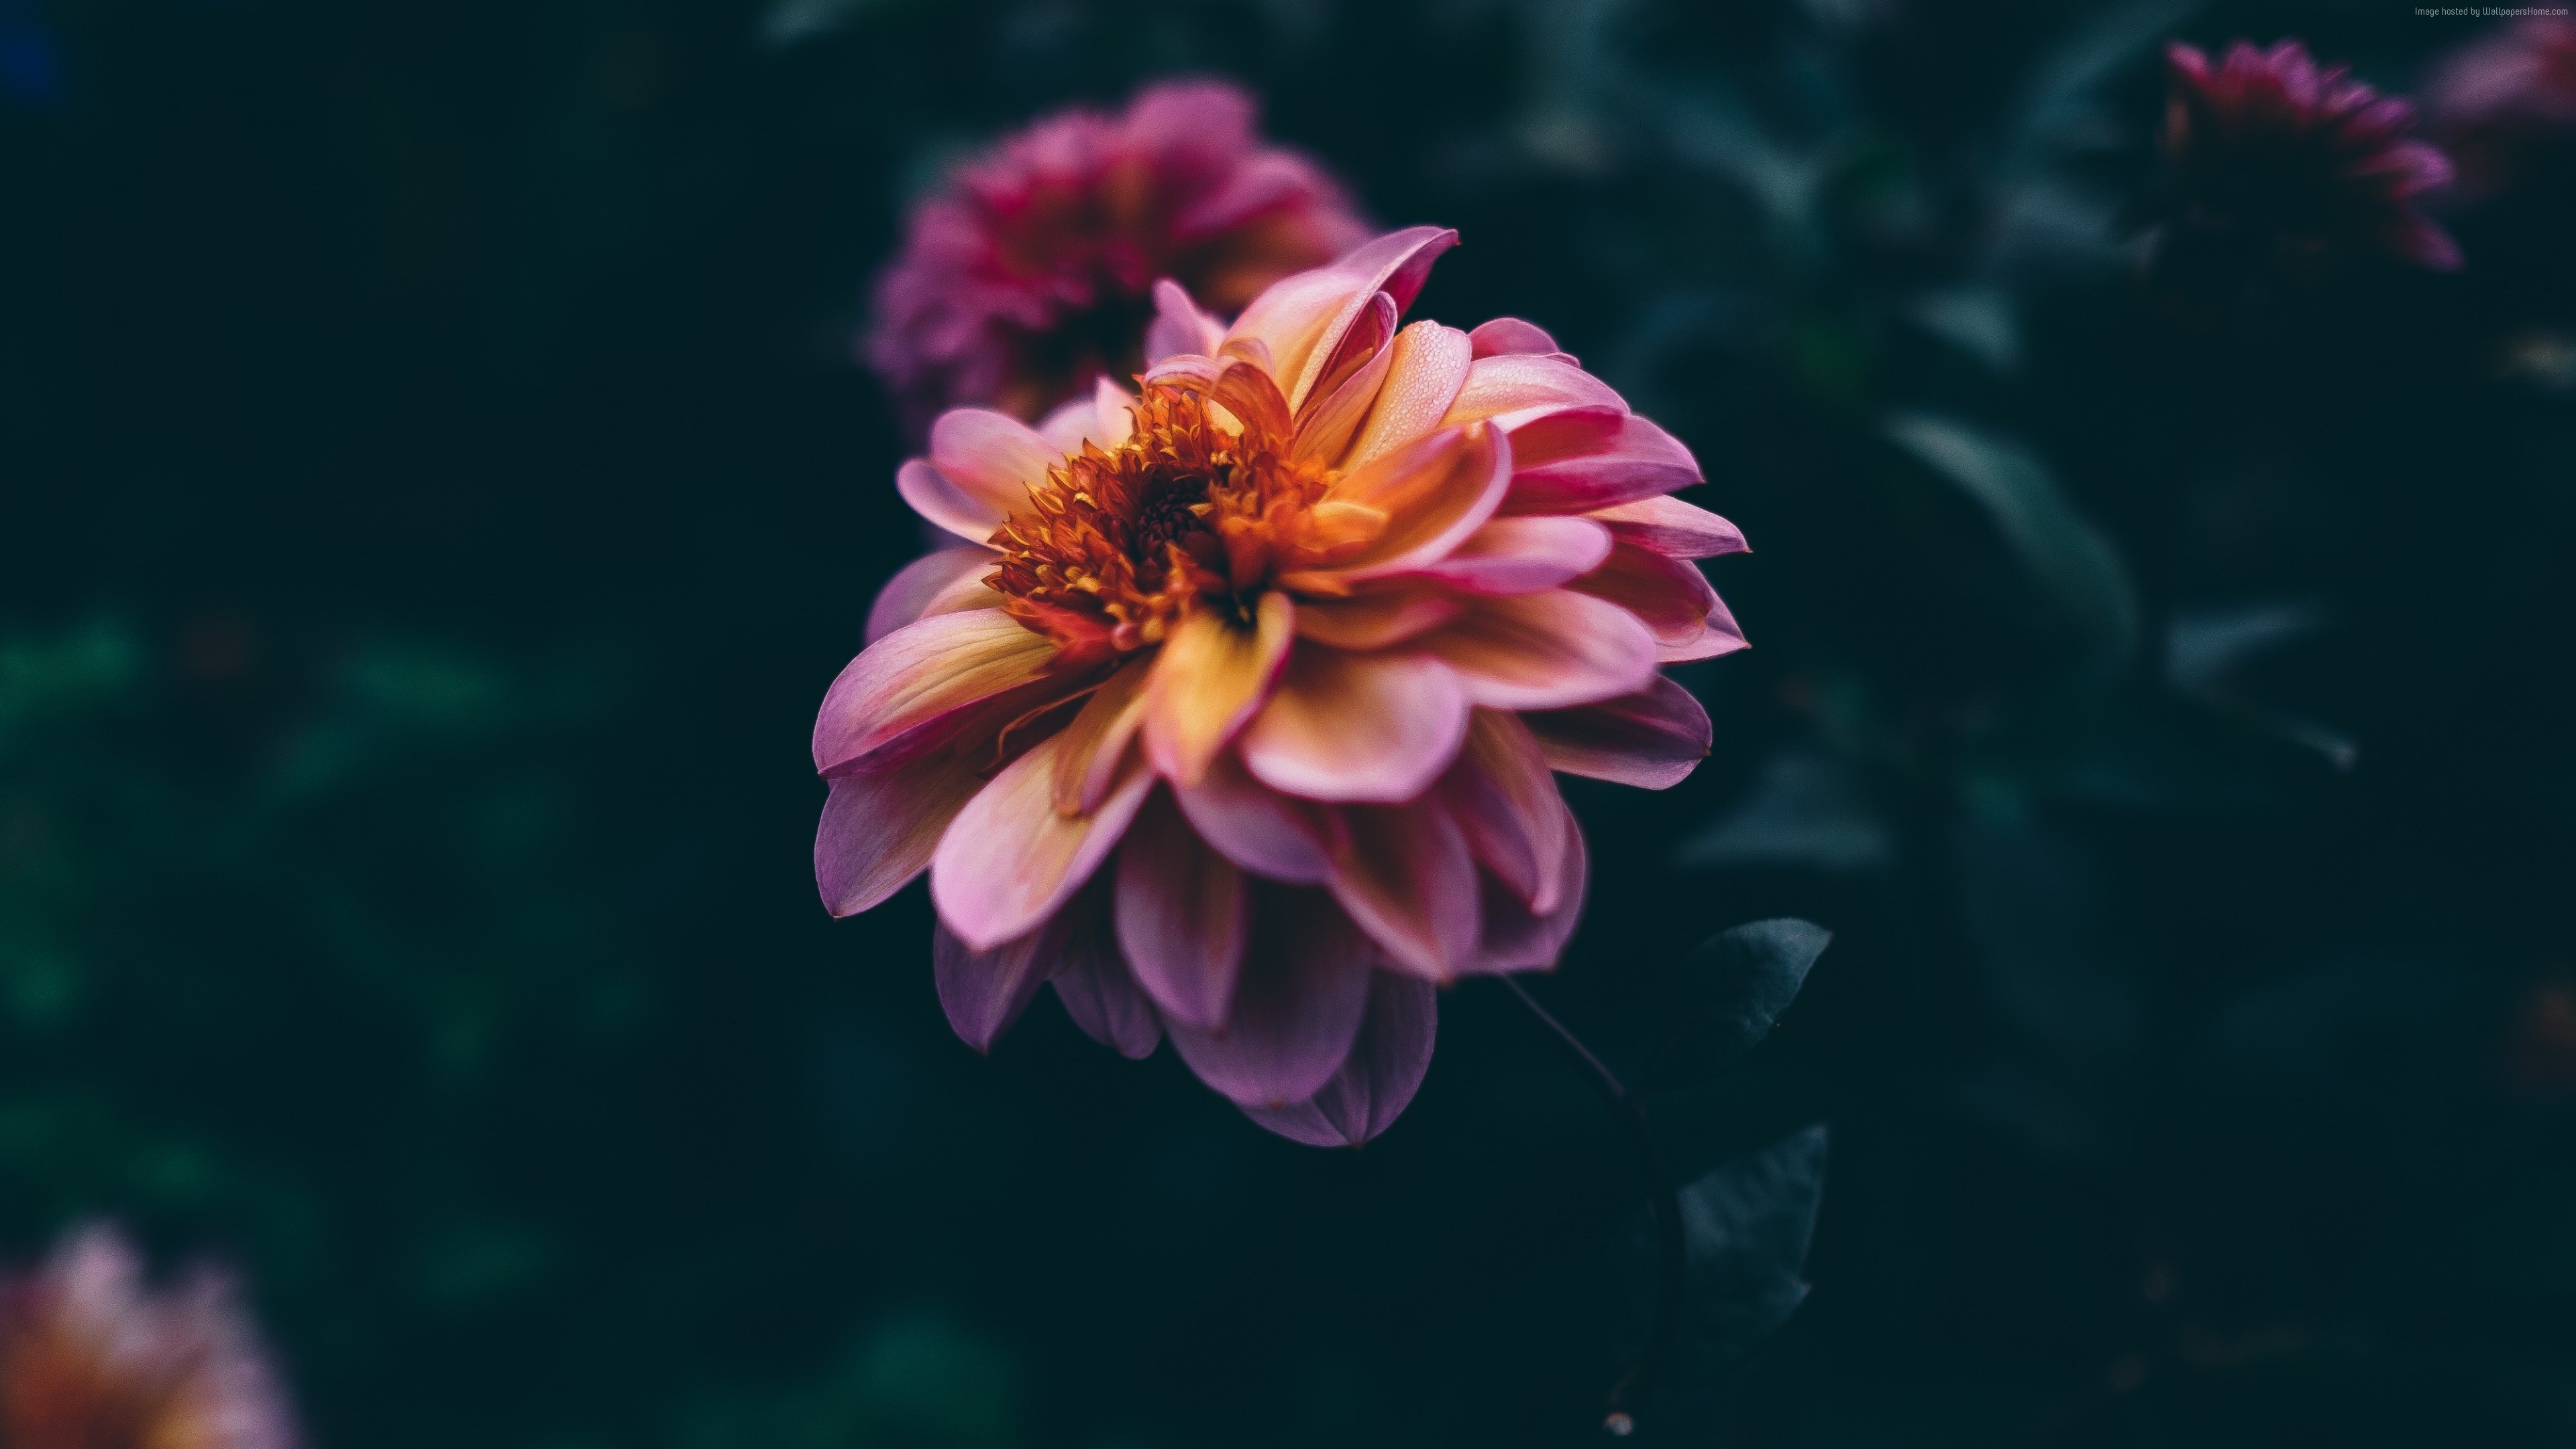 Previous Wallpaper - Dark Pictures Of Flowers , HD Wallpaper & Backgrounds